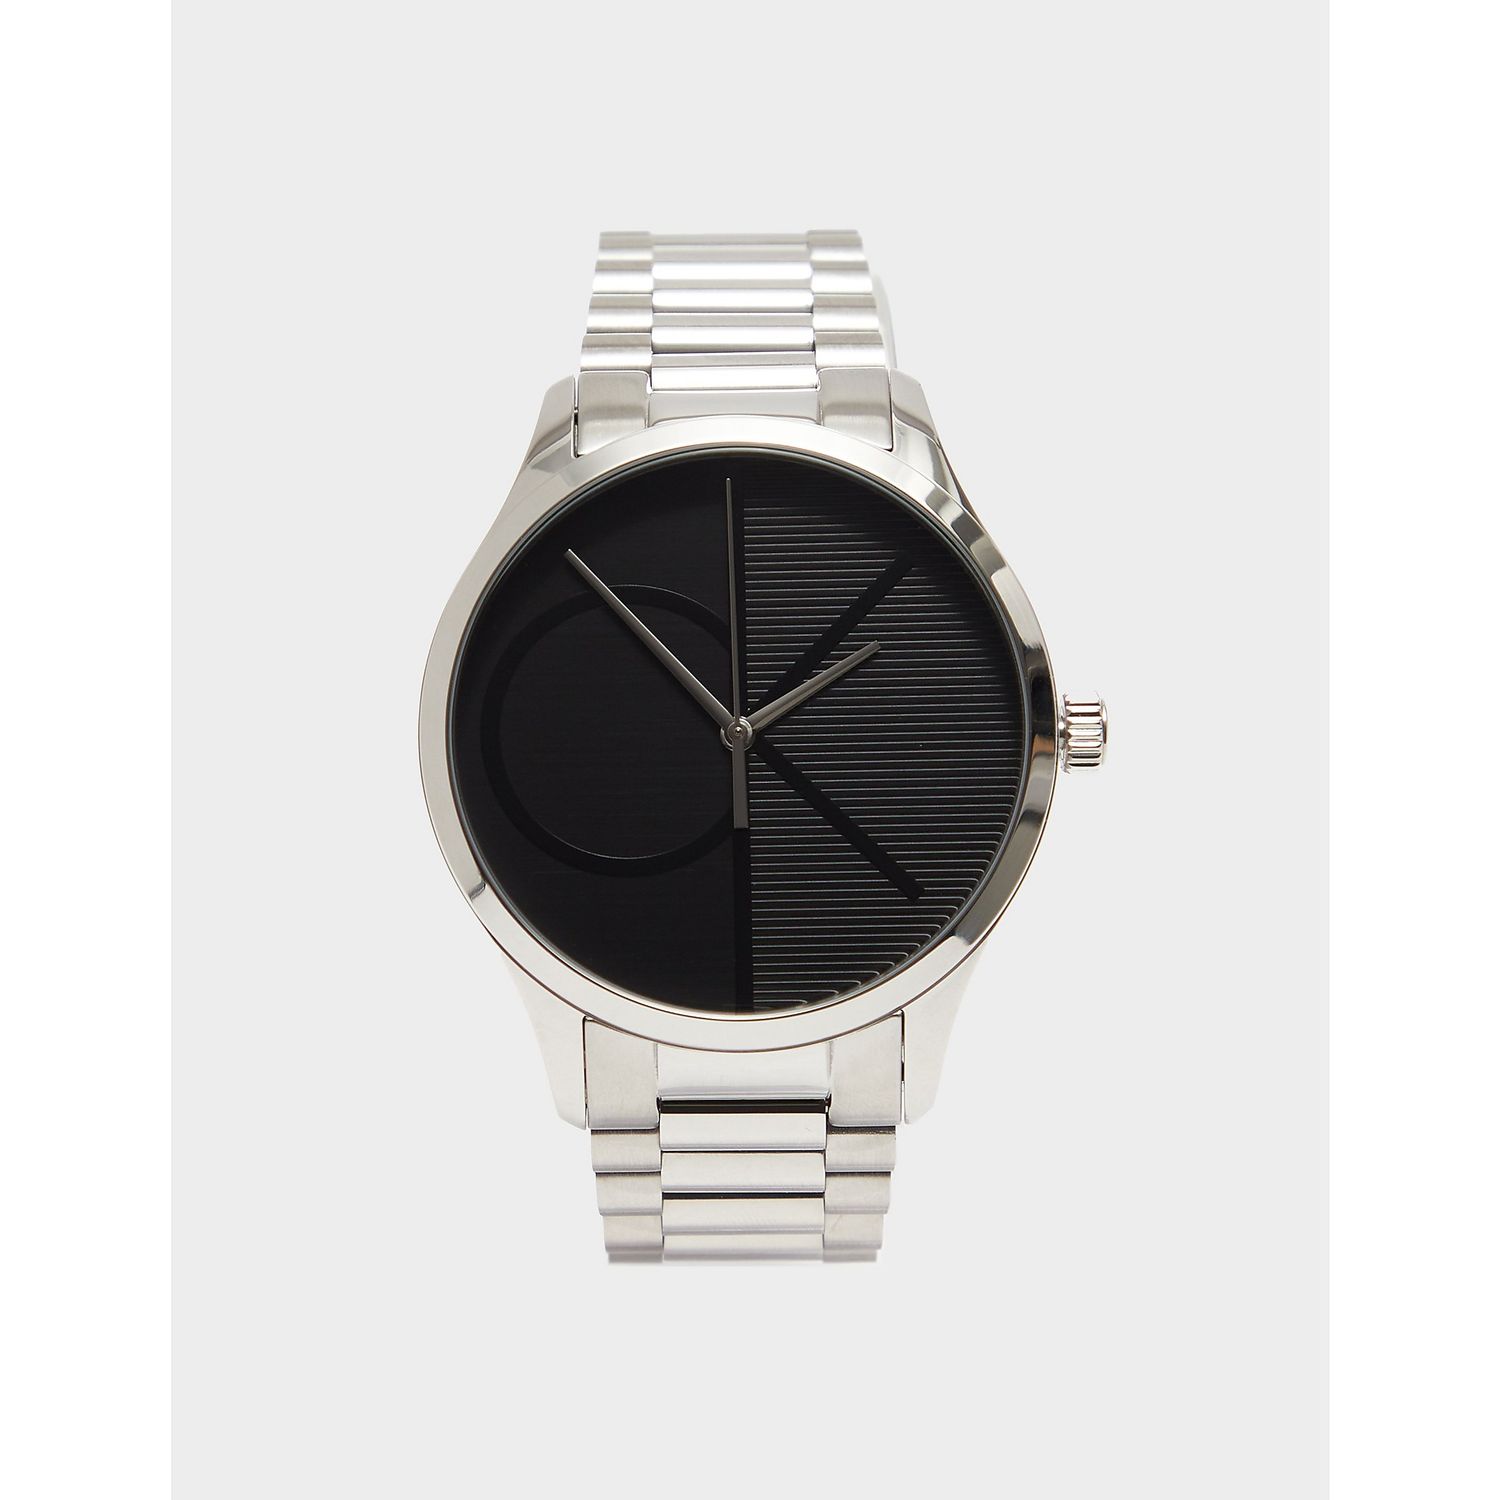  Calvin Klein Iconic Stainless Steel 35 MM Case Watch with TT  Bracelet (Model: 25200168) : Clothing, Shoes & Jewelry